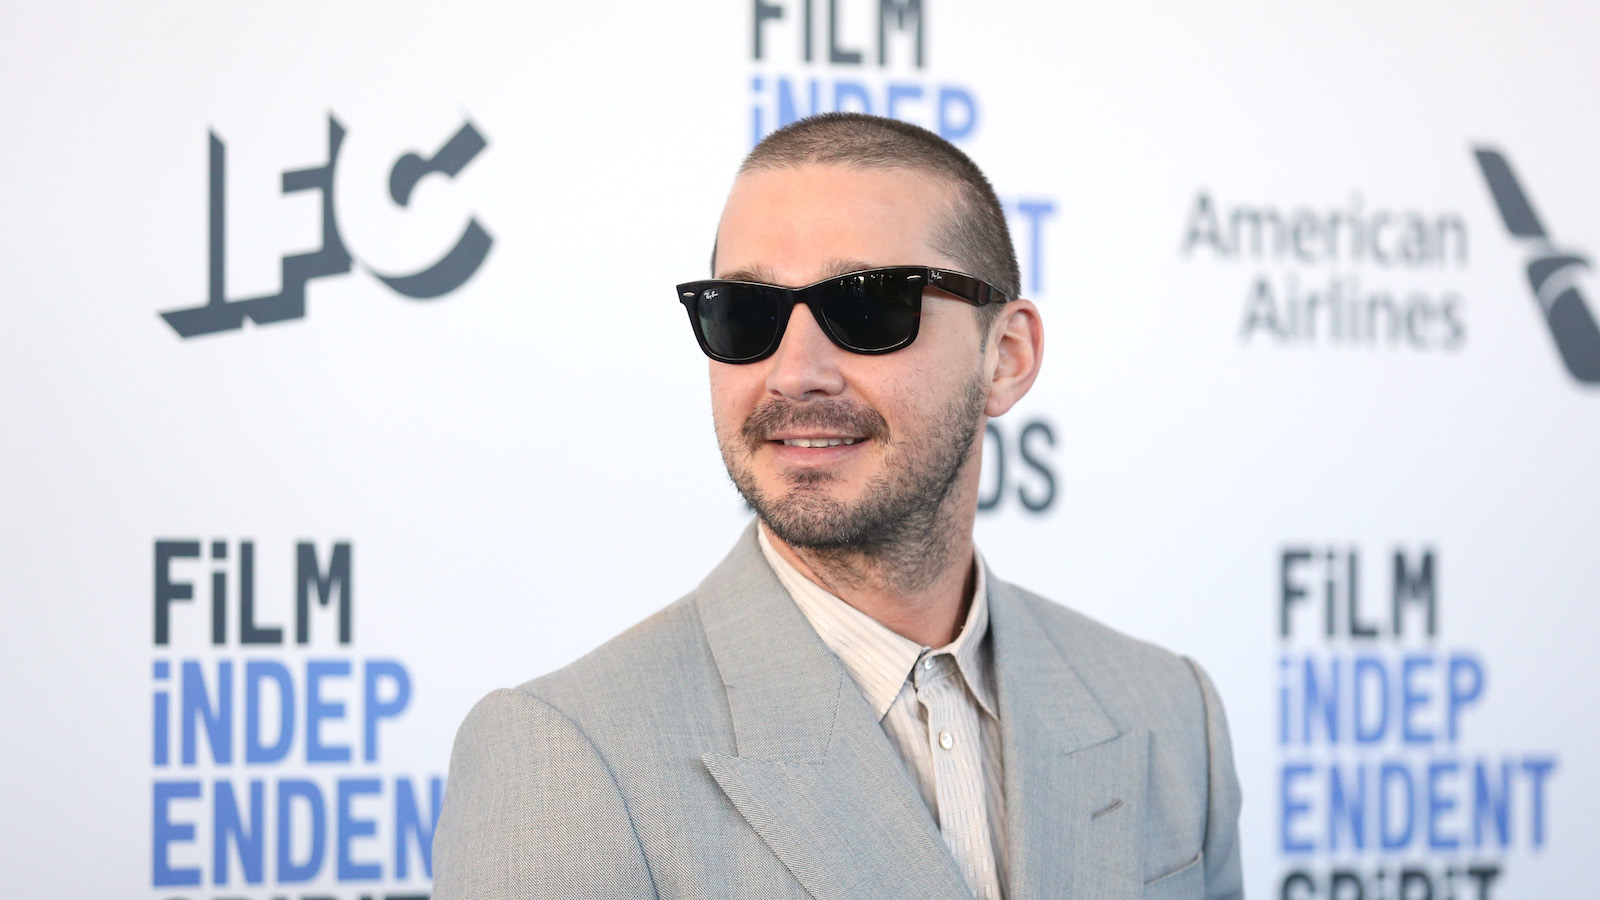 Francis Ford Coppola casts LeBeouf in major new project